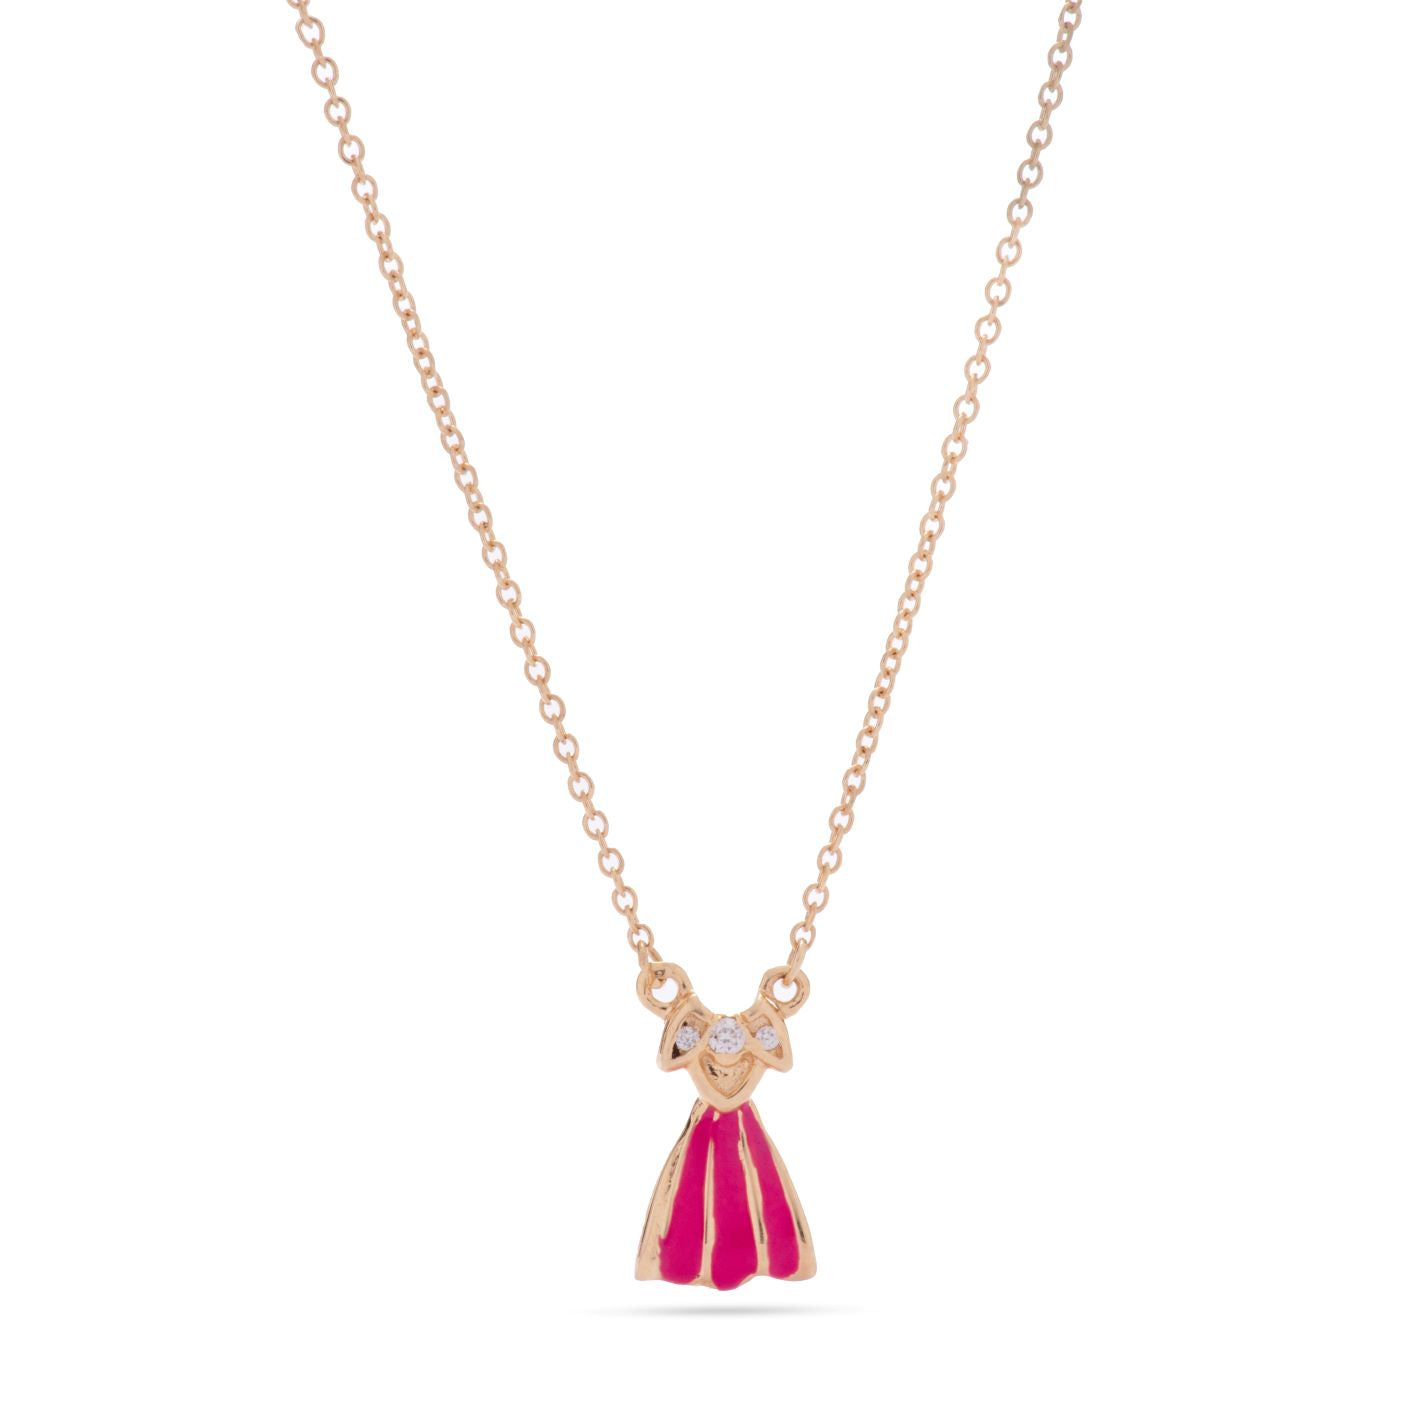 Kid's Delightful Doll Shaped Necklace in Yellow 18 K Gold - NB0565